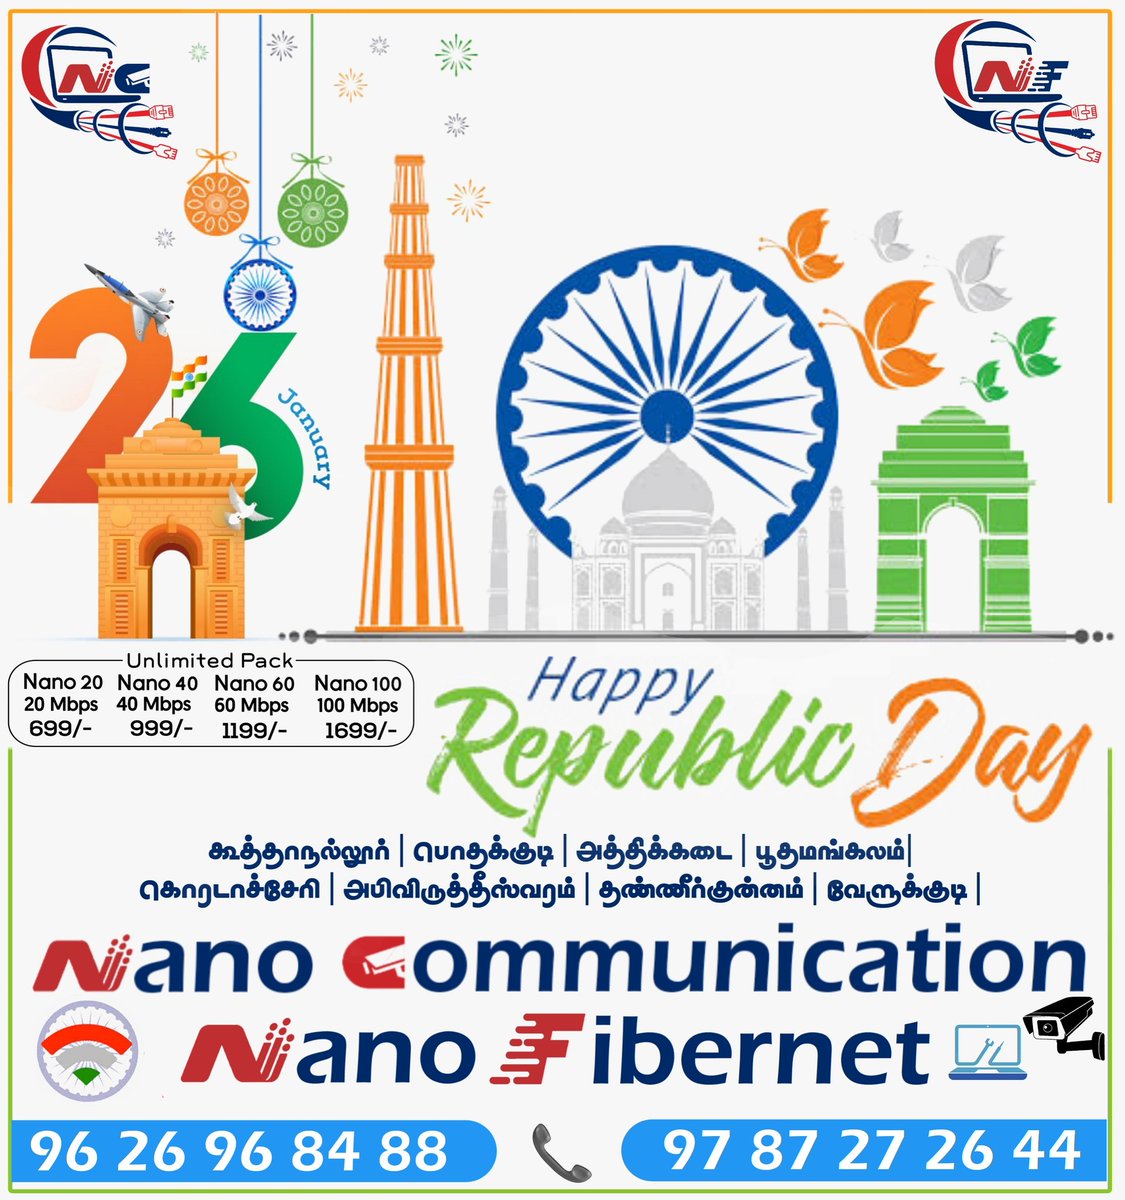 Wishing everyone a Happy #RepublicDay2021!
Everyone who is born in this great land has only one identity - We are all Indians 🇮🇳🇮🇳🇮🇳
#republicday2021 #HappyRepublicDay #india #fiberinternet #nanofibernet #nanocommunication #computeraccessories #Cctvinstallation